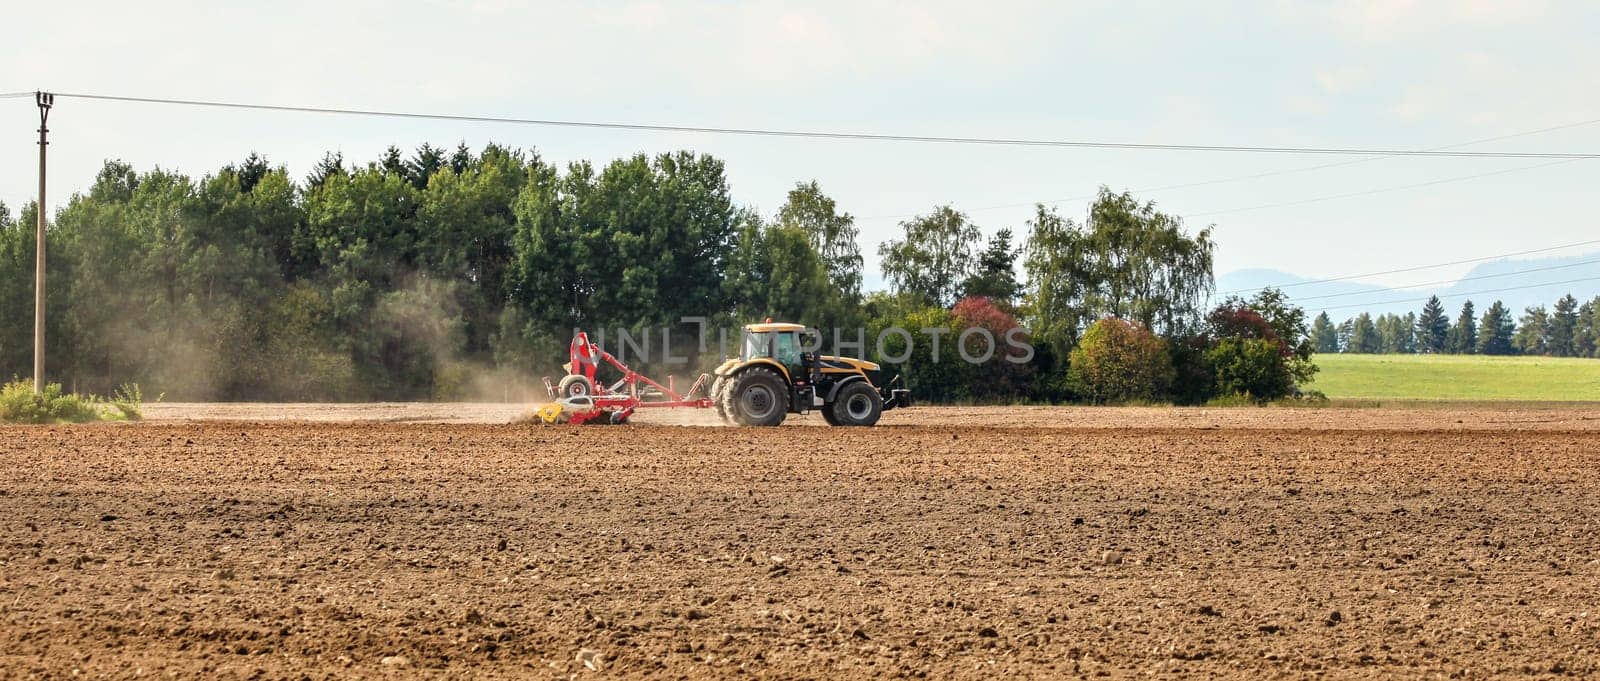 Tractor sowing on empty field, small trees in background. Wide agriculture banner. by Ivanko